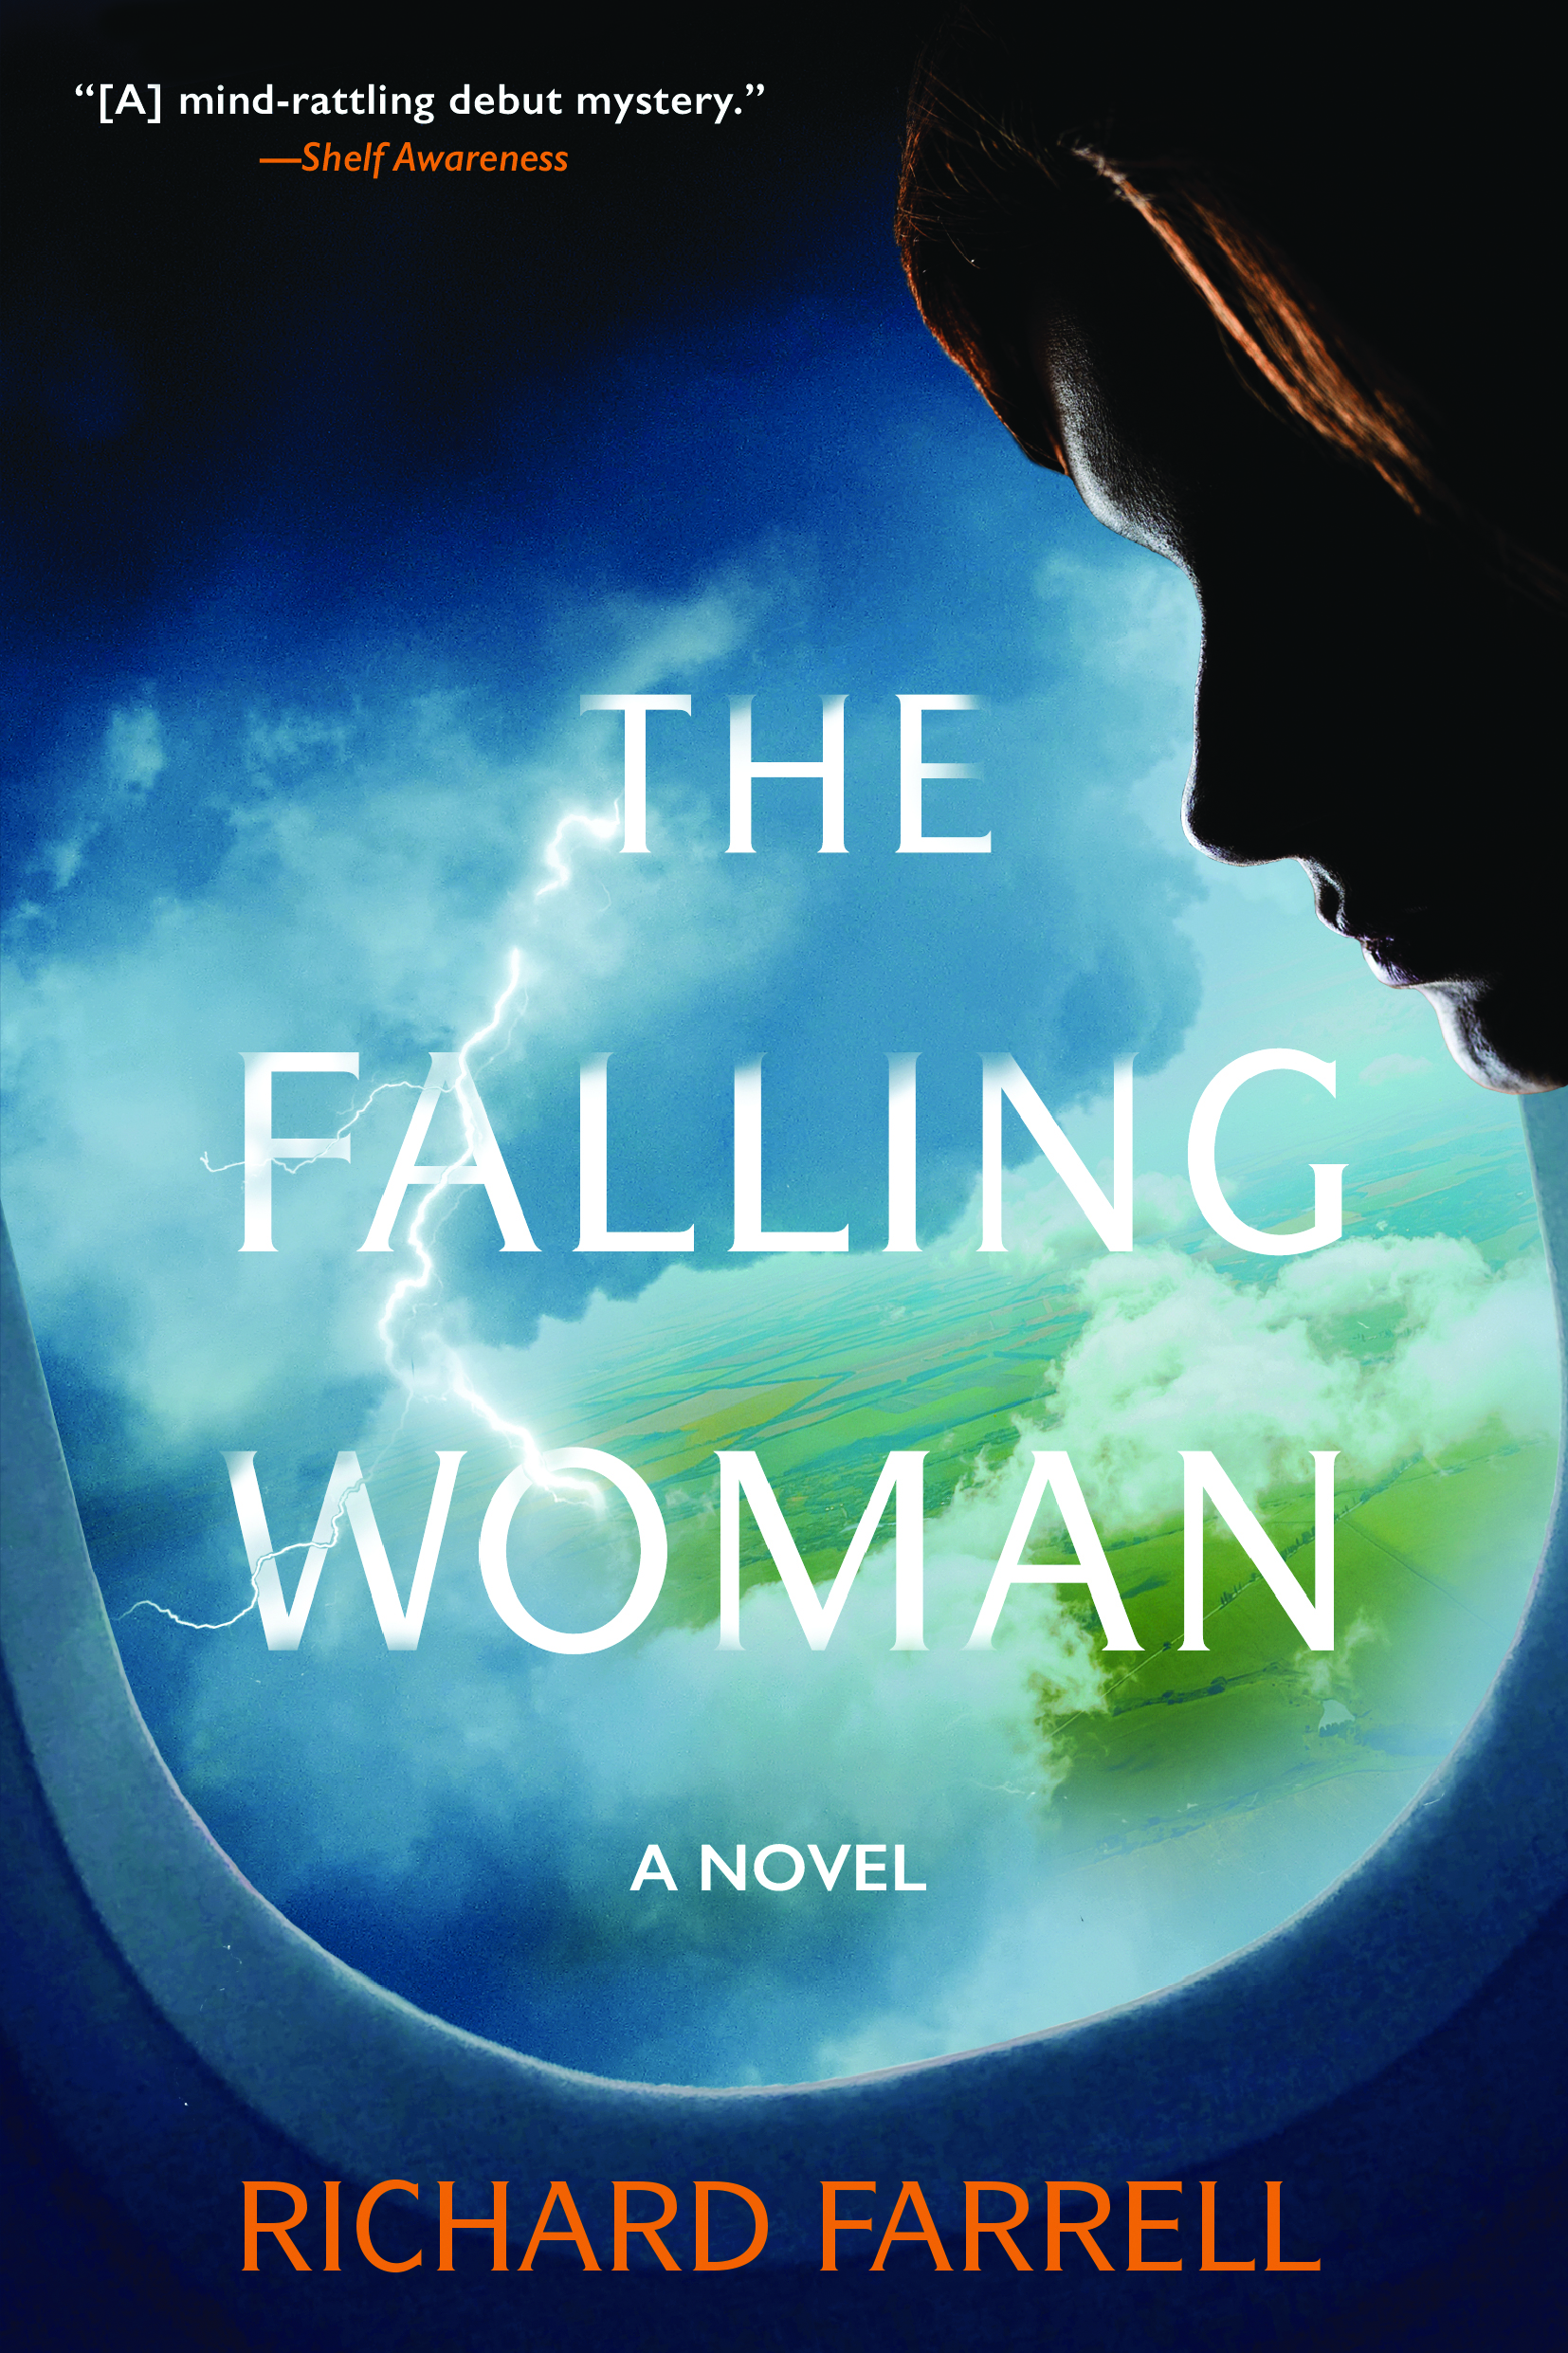 Review: The Falling Woman by Richard Farrell